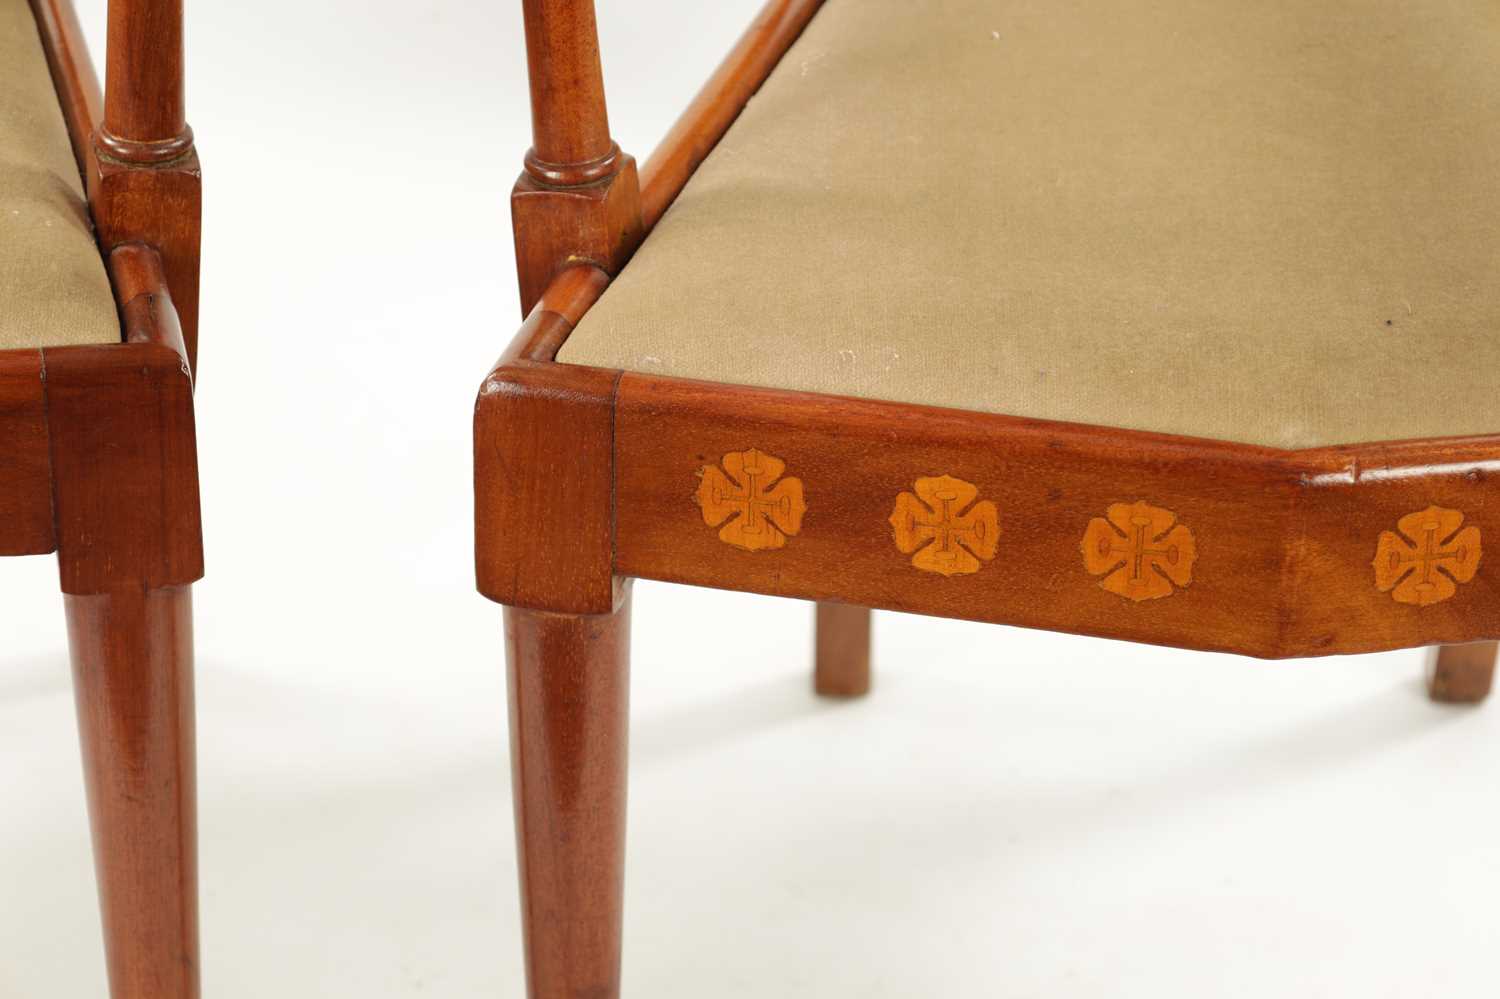 A PAIR OF INLAID MAHOGANY ART NOVEAU LIBERTY-STYLE UPHOLSTERED ARMCHAIRS - Image 5 of 11